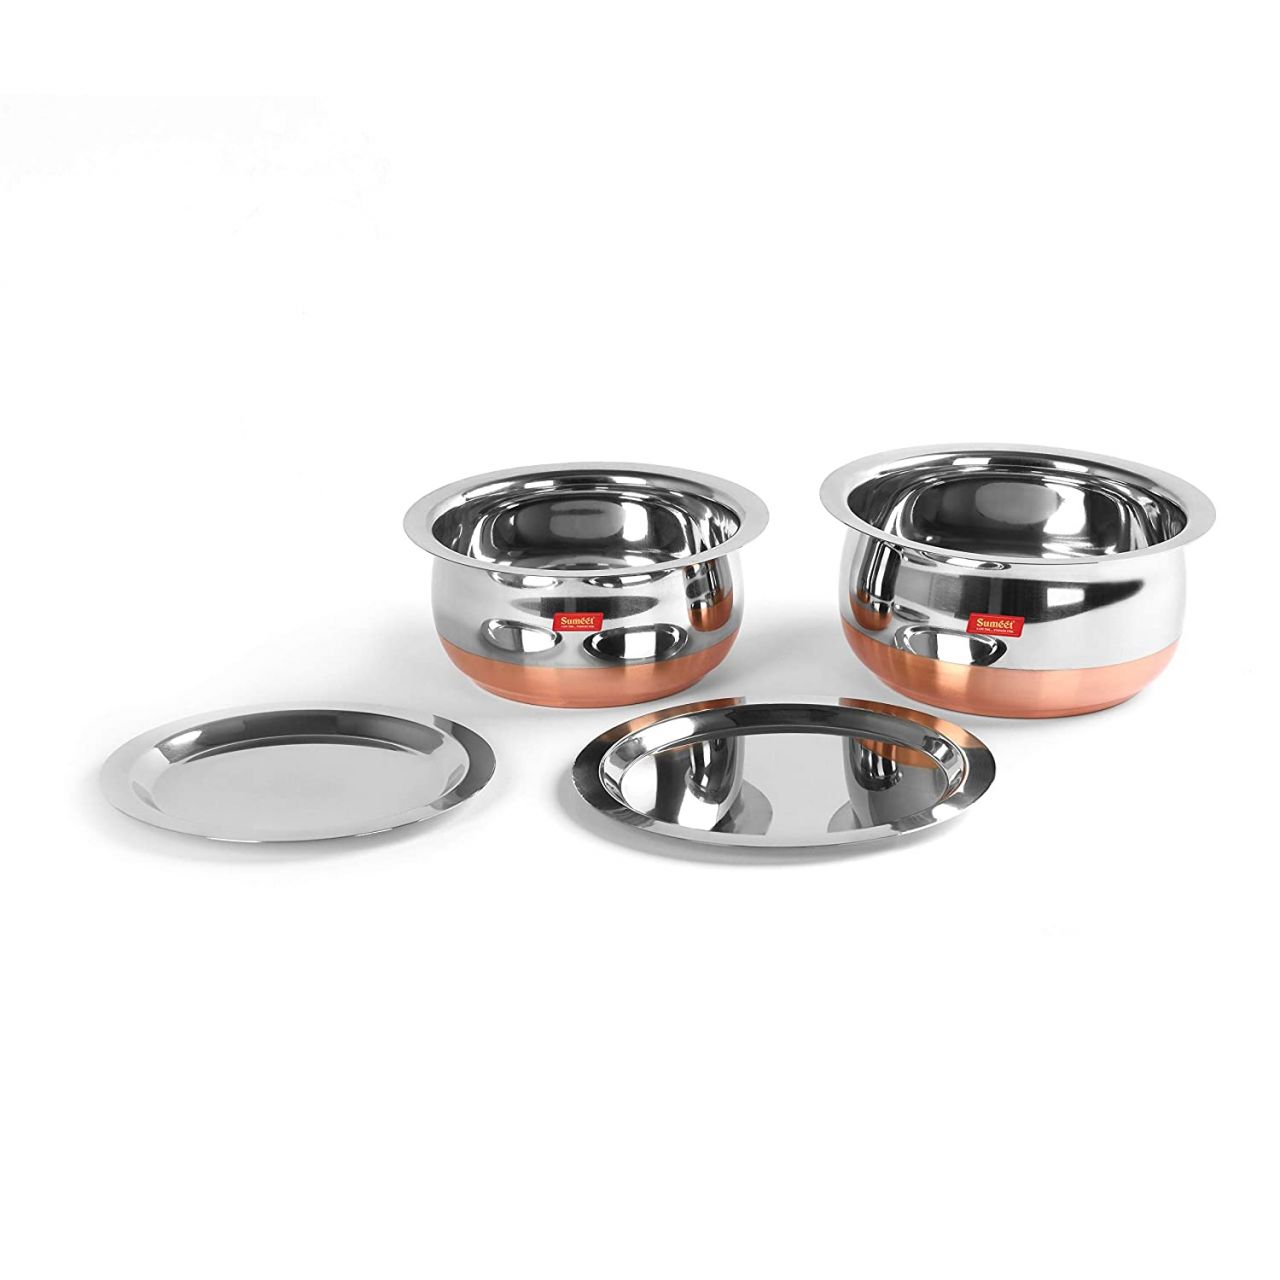 Sumeet Stainless Steel Copper Bottom Belly Shape 2 Pc Tope / Cookware/ Pot Set with Lid 1.4Ltr, 1.75Ltr (Silver)